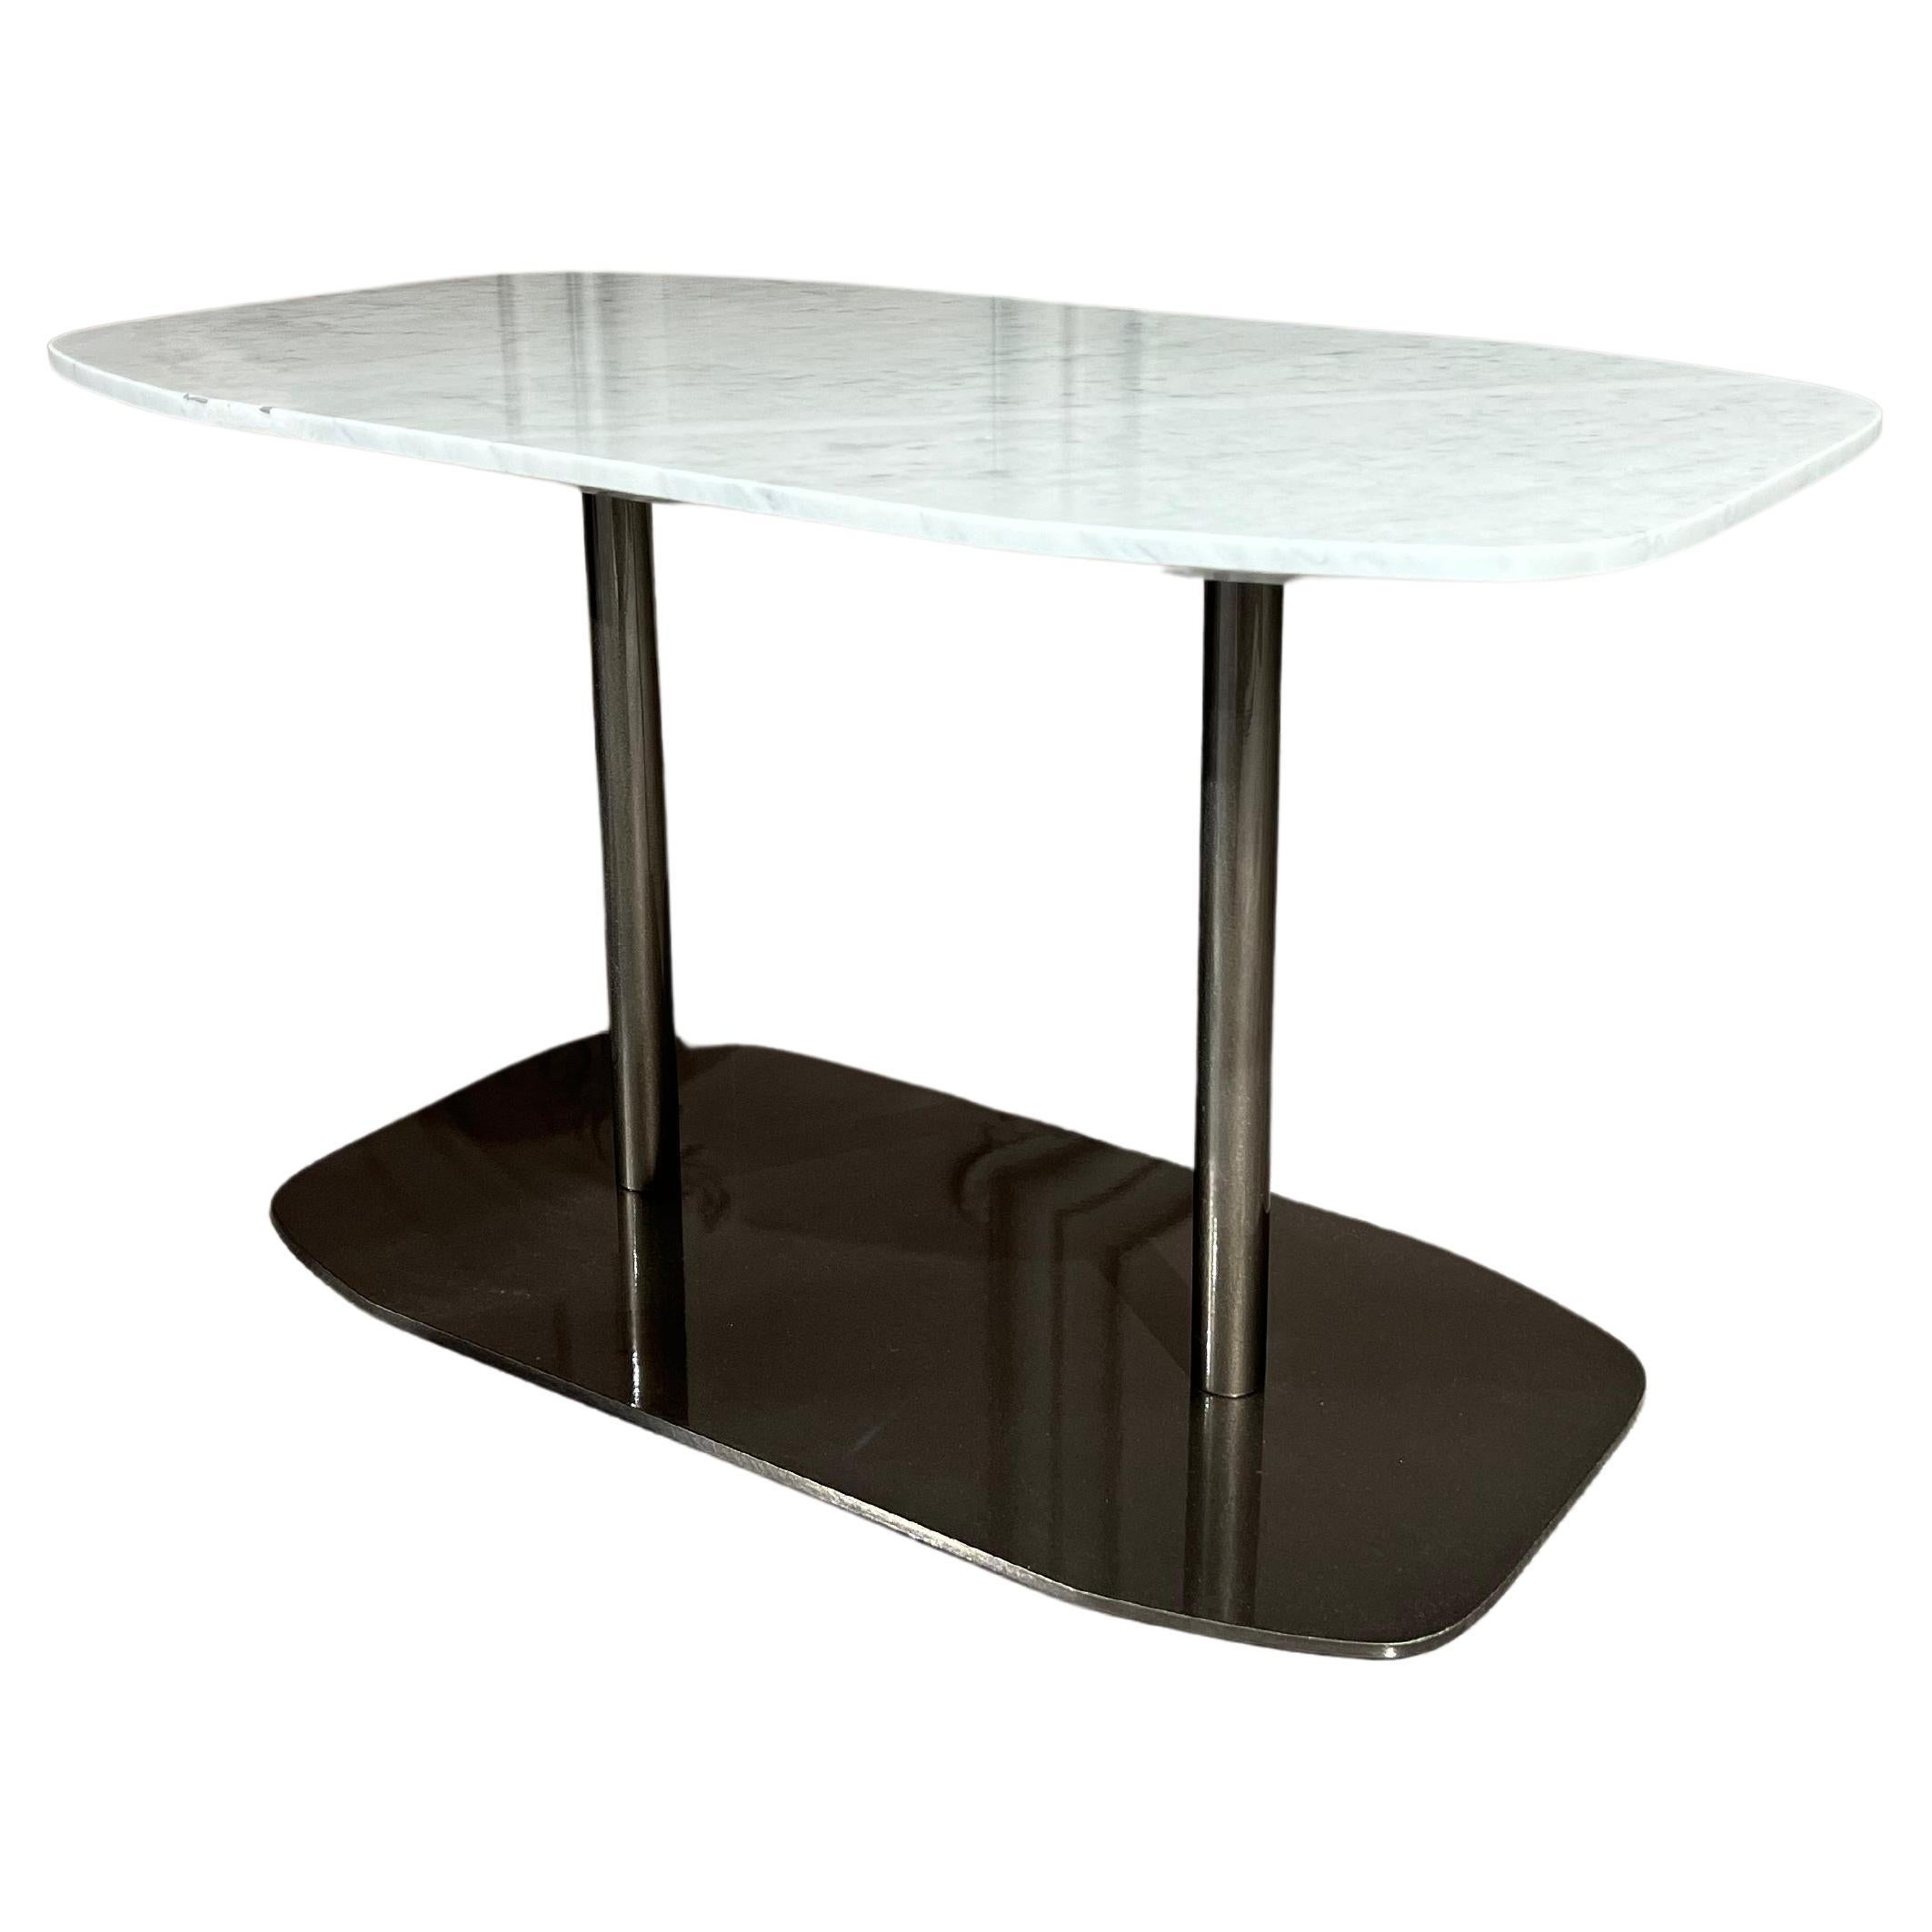 Senna coffee table in carrara marble and titanium finish steel frame For Sale